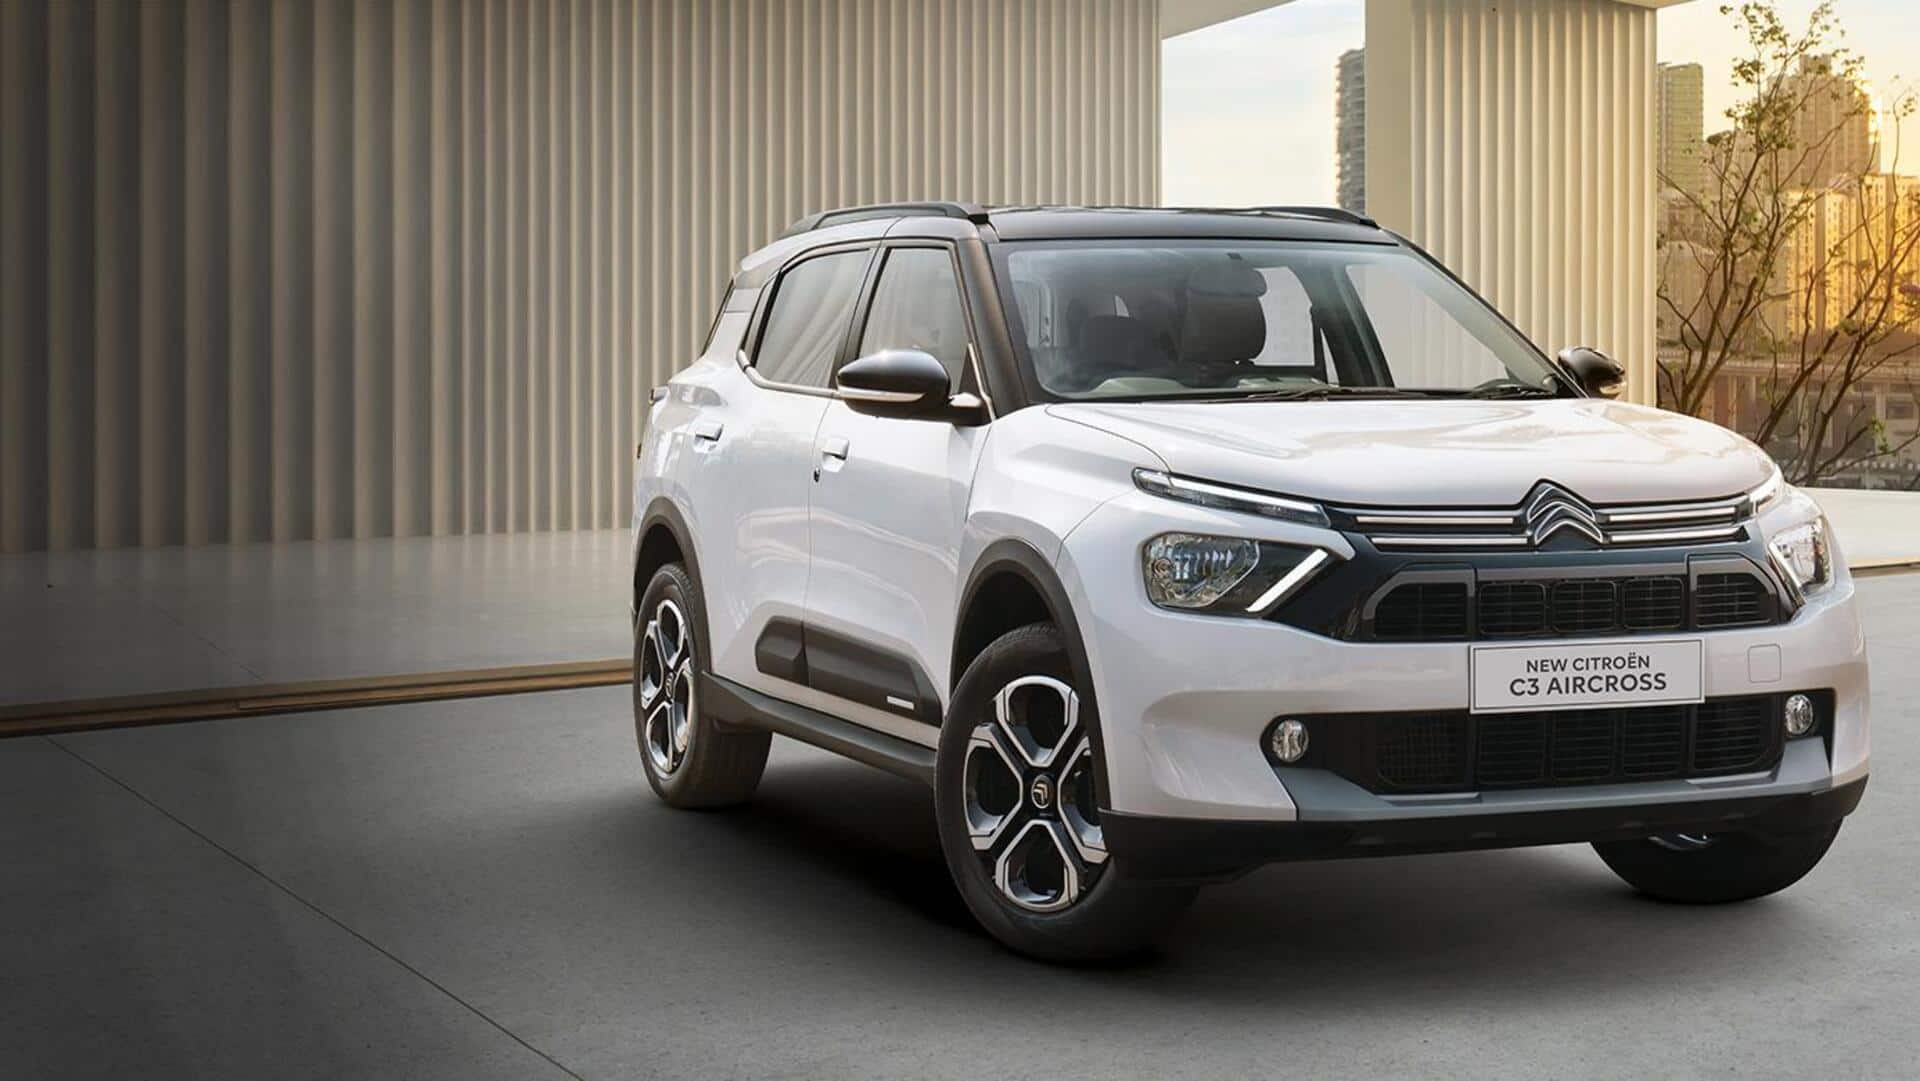 Citroen C3 Aircross is available with Rs. 1.75 lakh discount